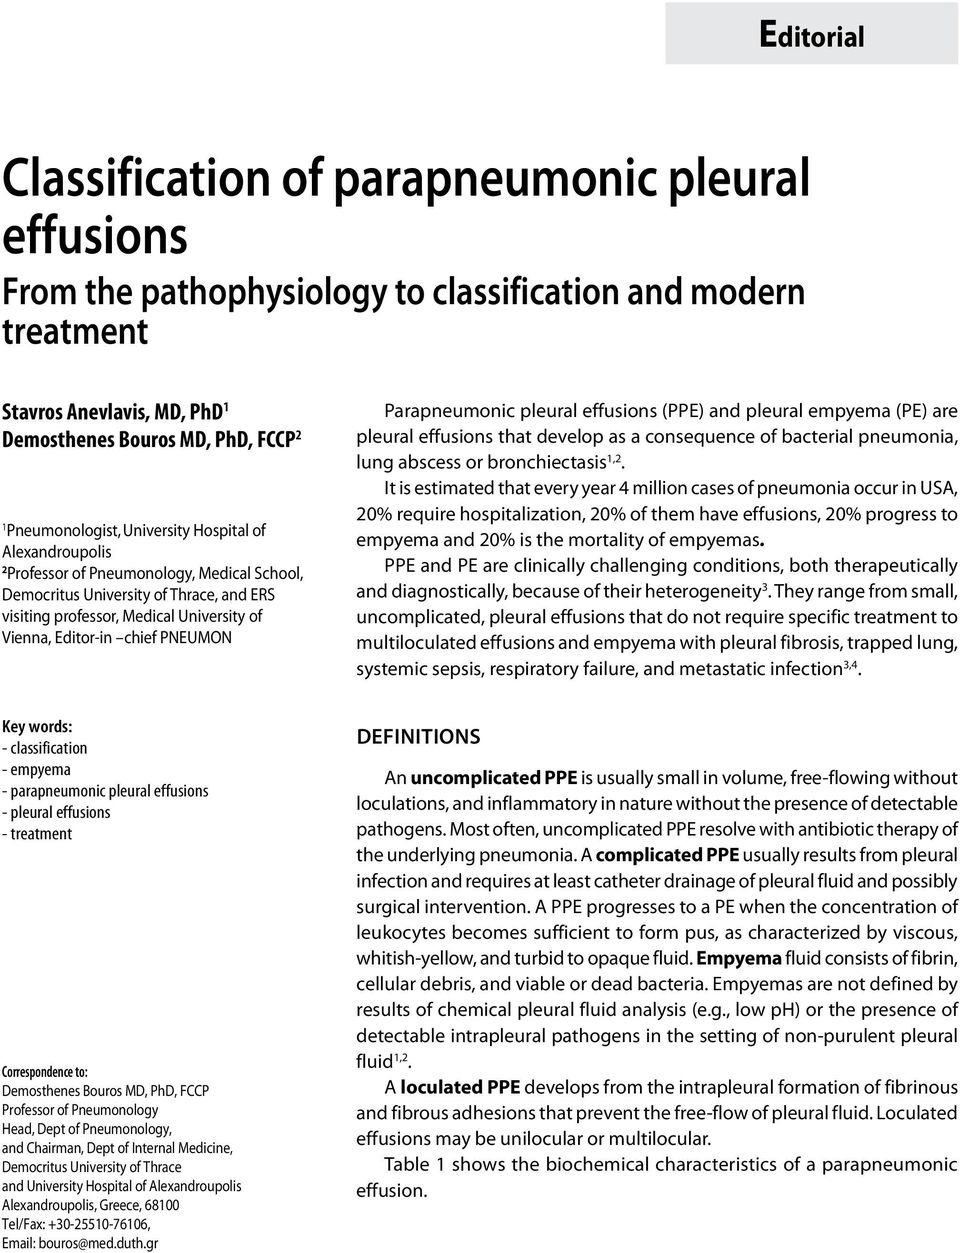 Editor-in chief PNEUMON Parapneumonic pleural effusions (PPE) and pleural empyema (PE) are pleural effusions that develop as a consequence of bacterial pneumonia, lung abscess or bronchiectasis 1,2.